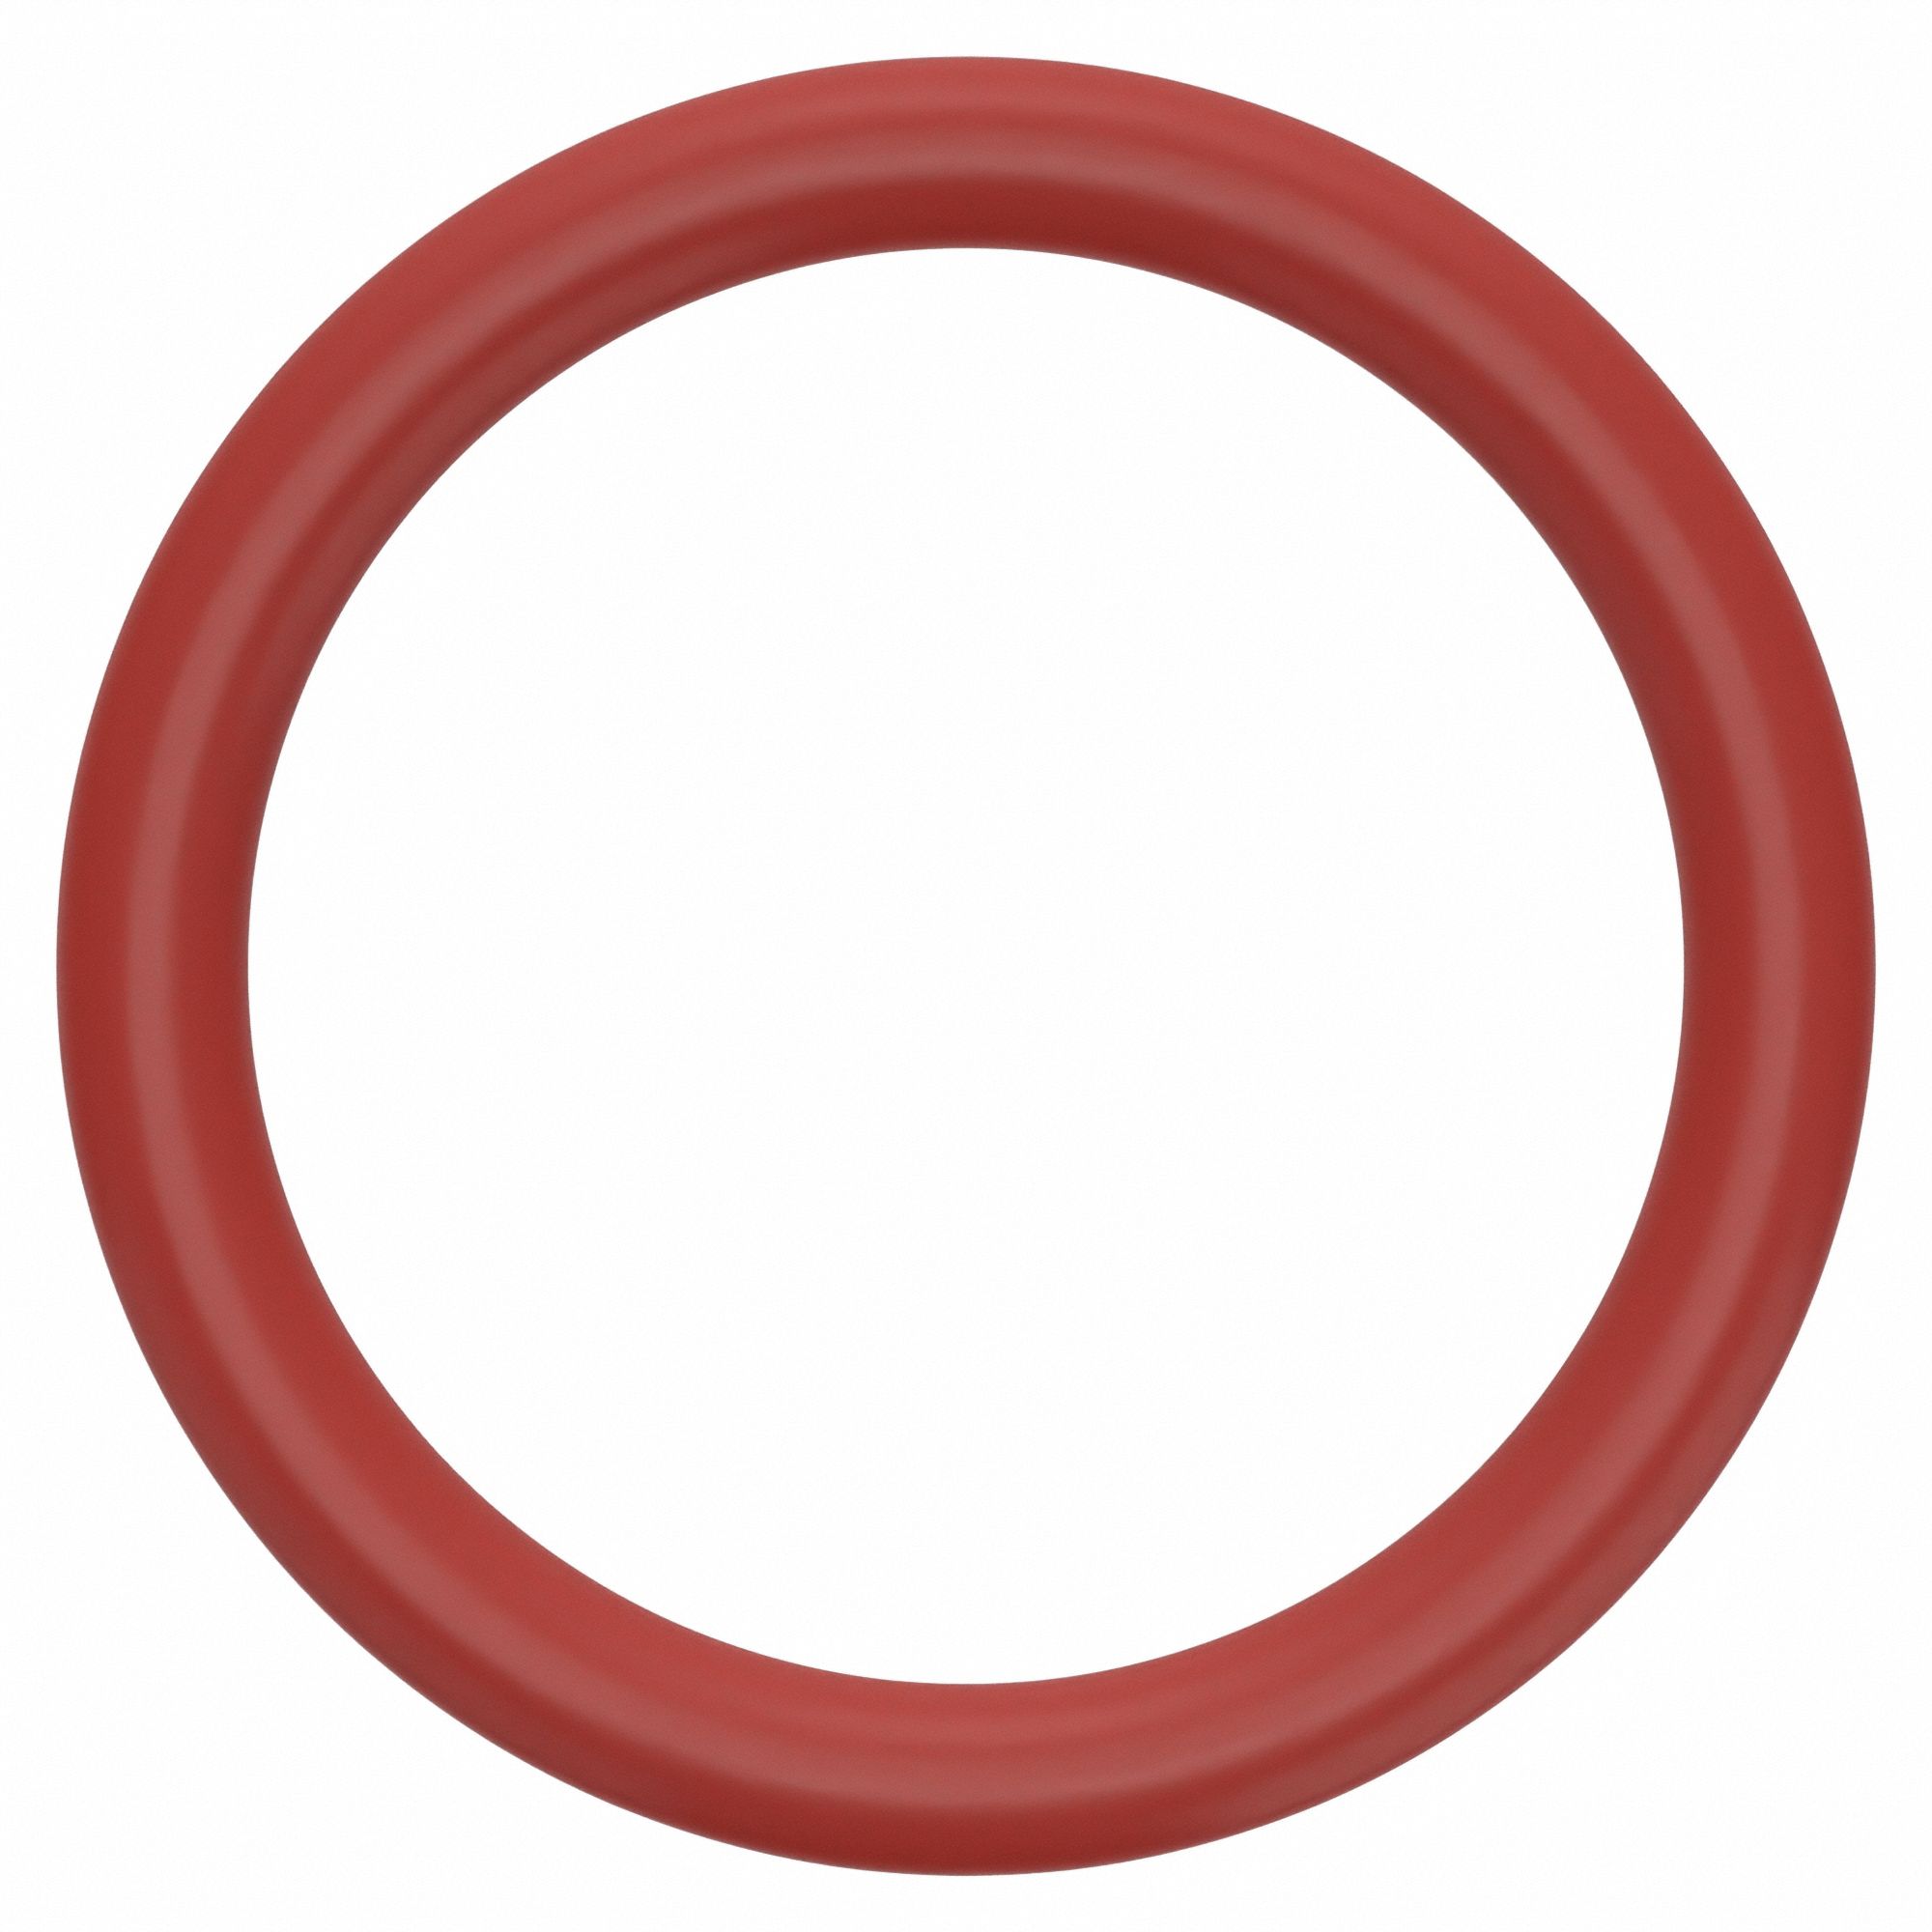 222 Silicone O-Ring, 70A Durometer, Red, 1-1/2 ID, 1-3/4 OD, 1/8 Width  (Pack of 5)